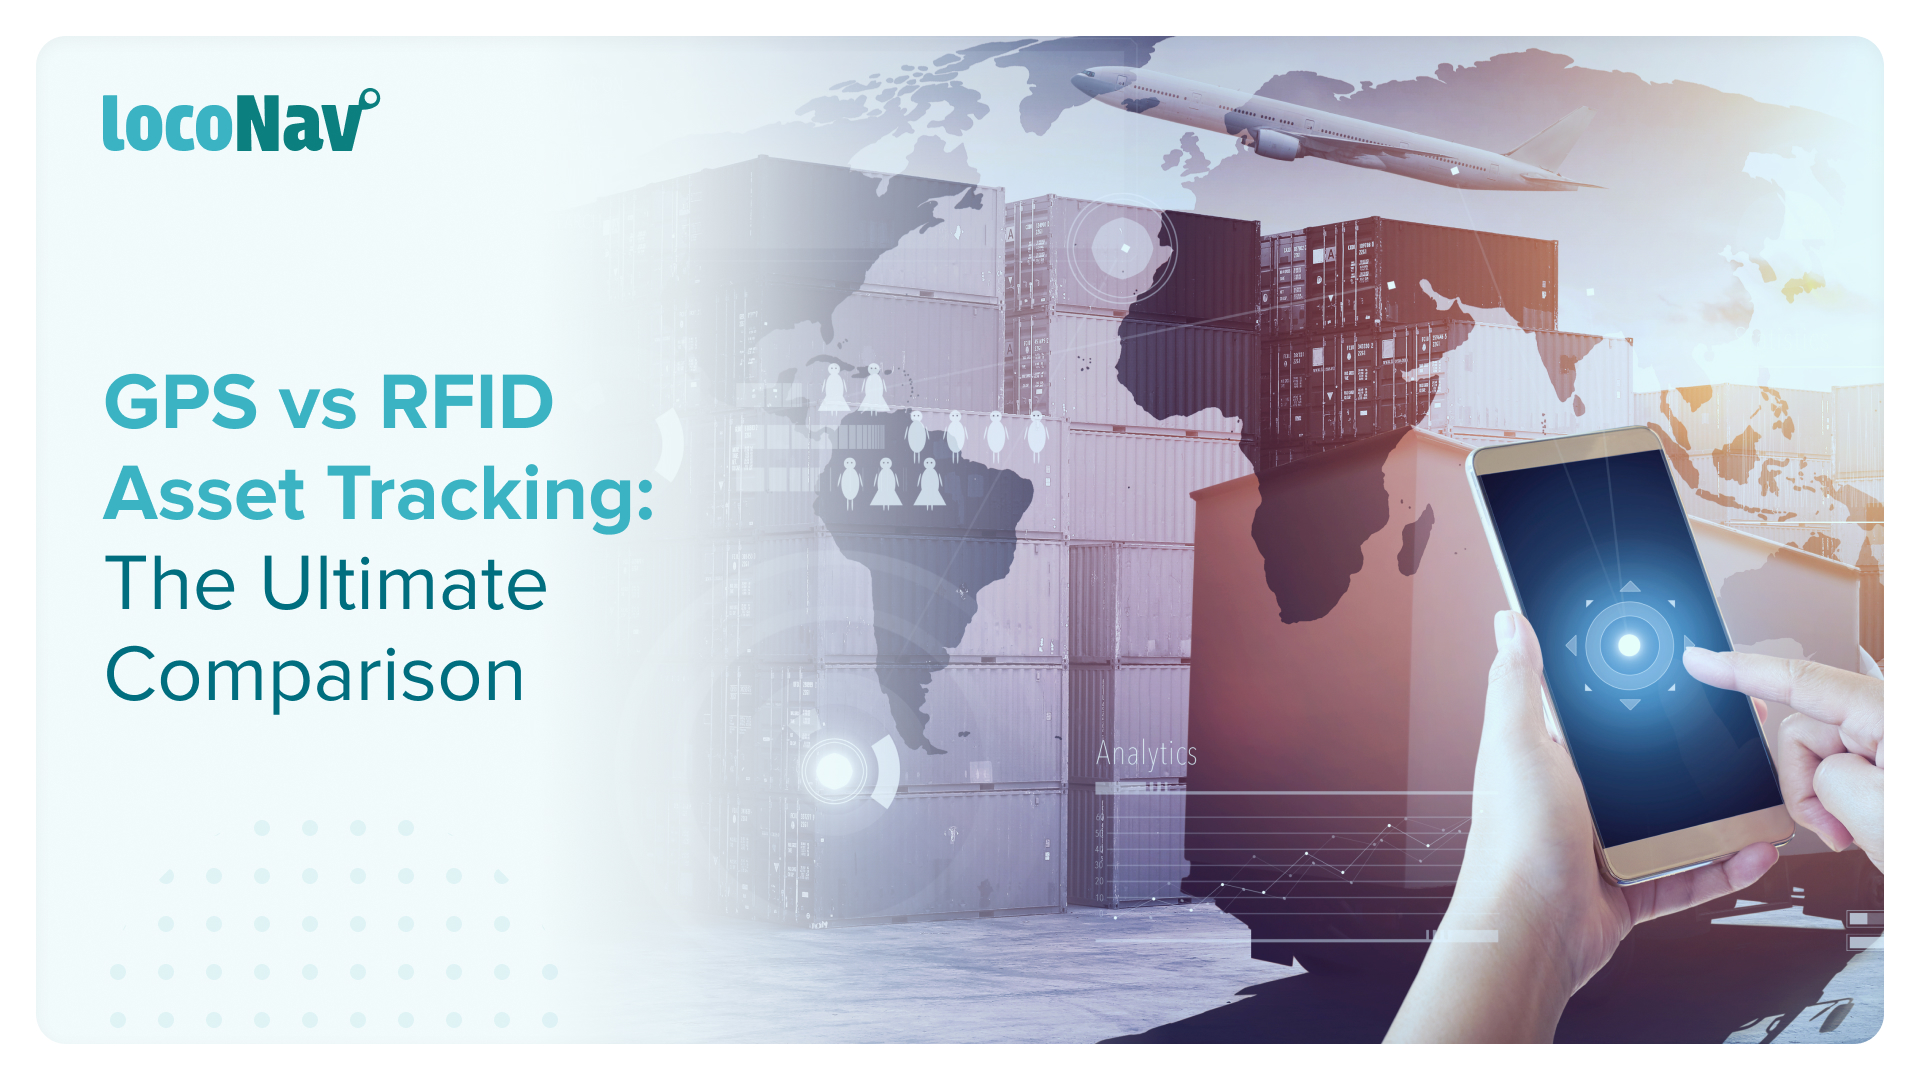 RFID Asset Tracking: Comparison & Uses